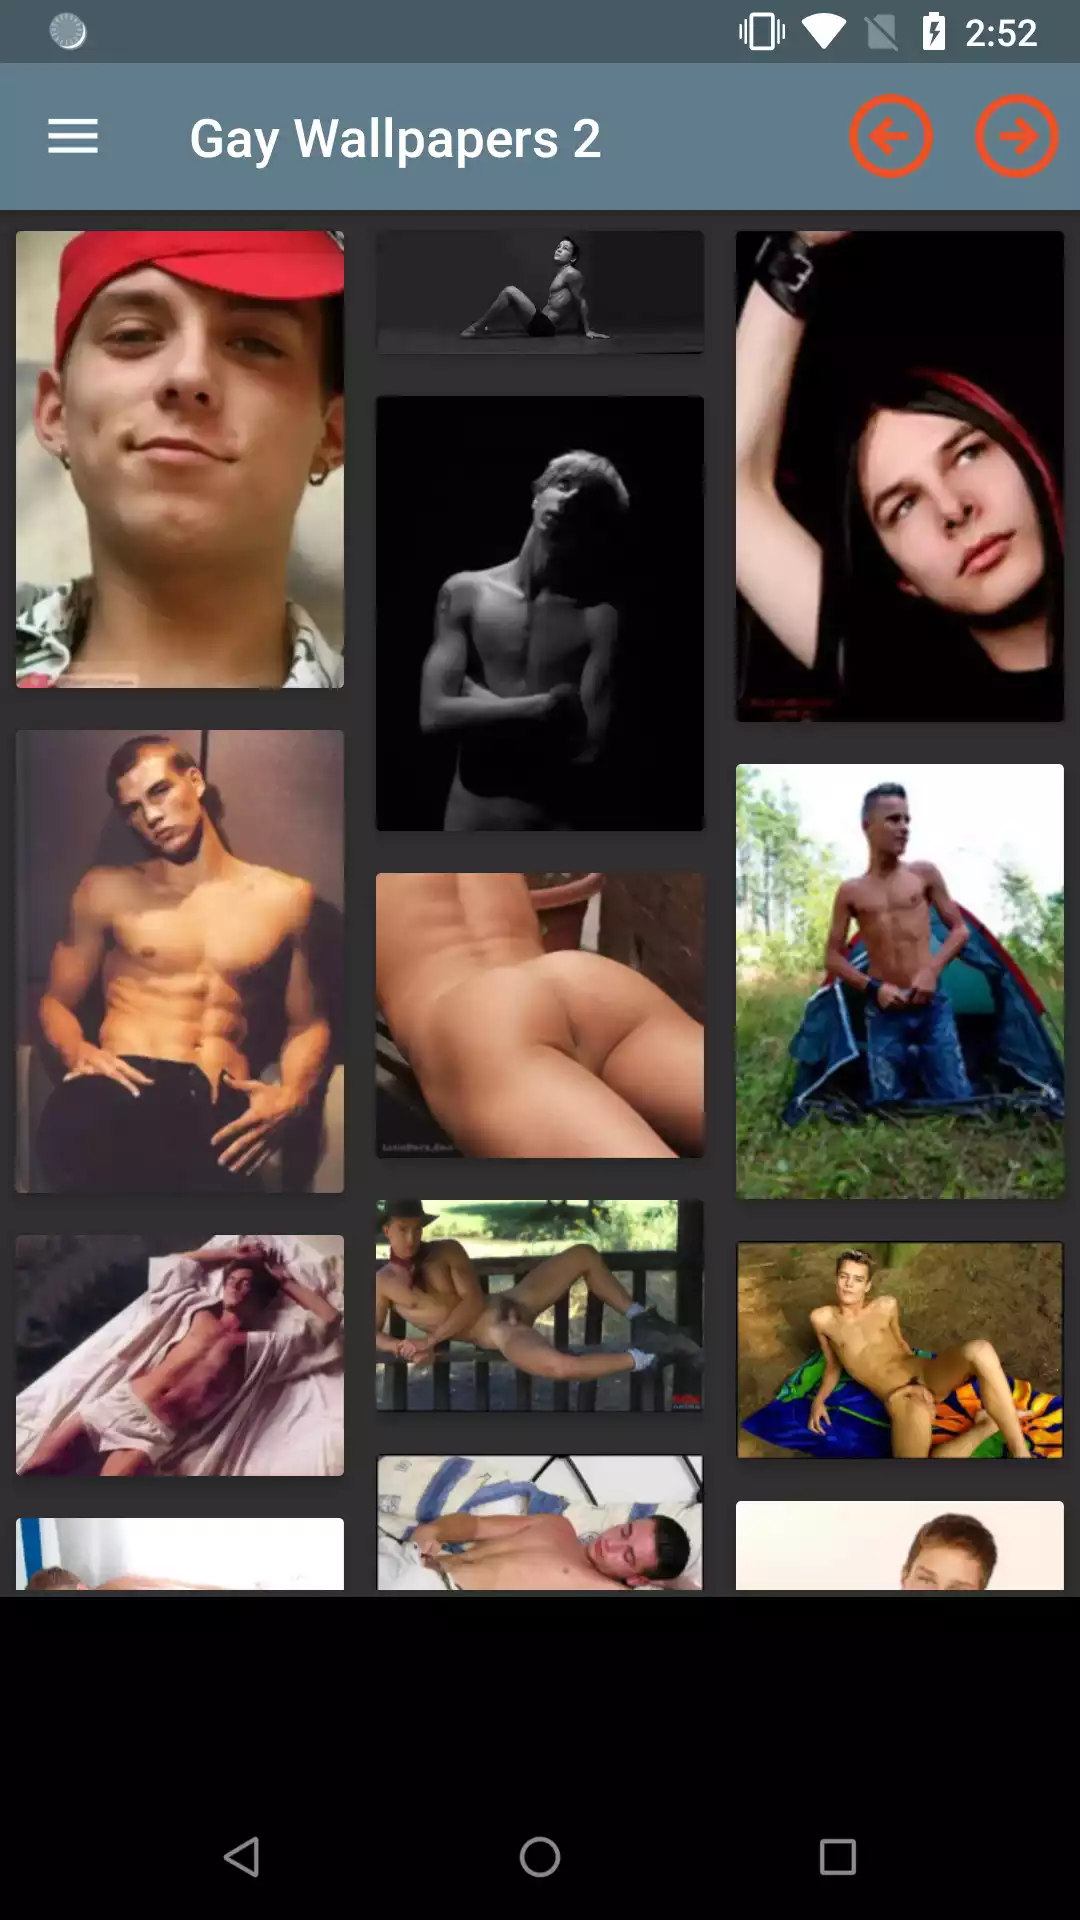 Gay Wallpapers gay,saxy,backgrounds,wallpapers,sexy,gallery,pics,download,galleries,hantai,pic,apps,porn,pornstar,collection,hentia,pictures,hot,apk,photo,hentai,shemale,men,editor